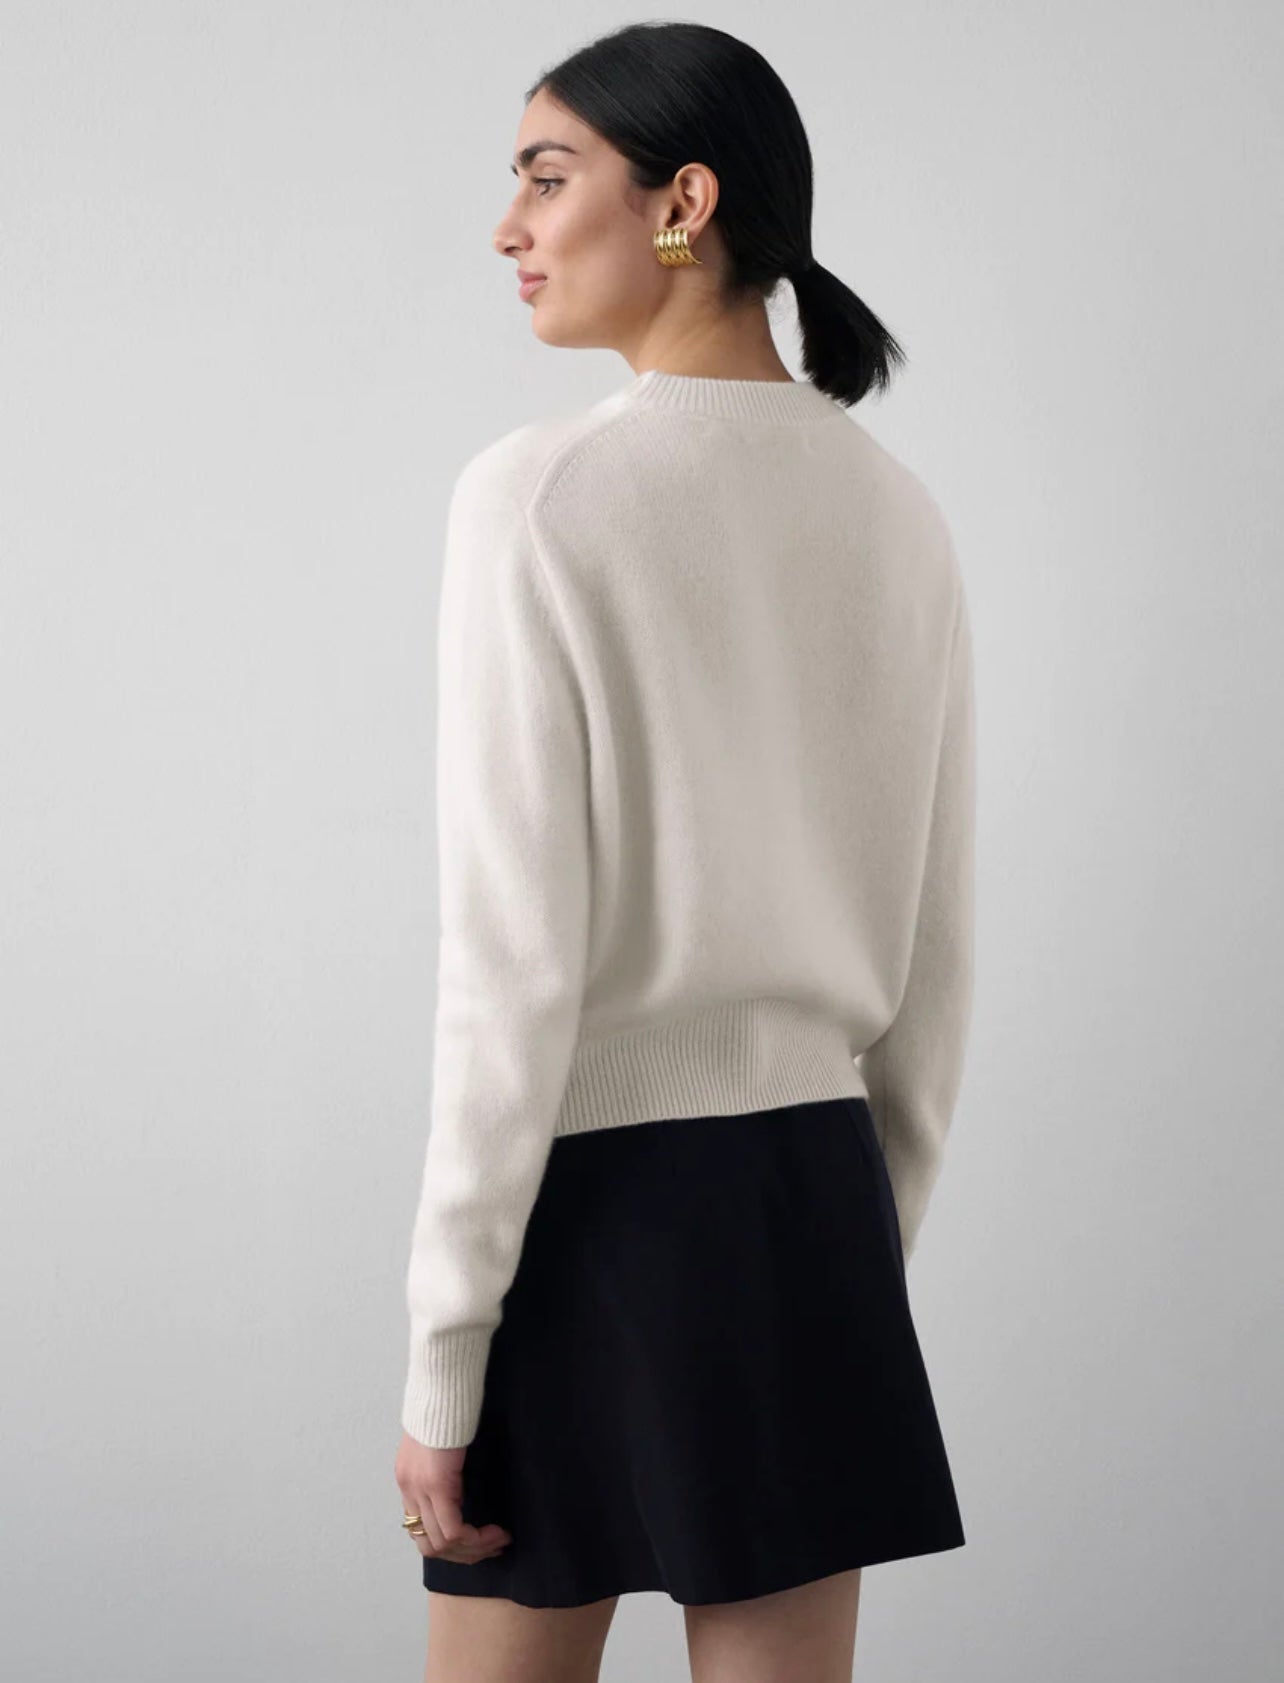 White + Warren Cashmere Coat Of Arms Embroidered Crewneck